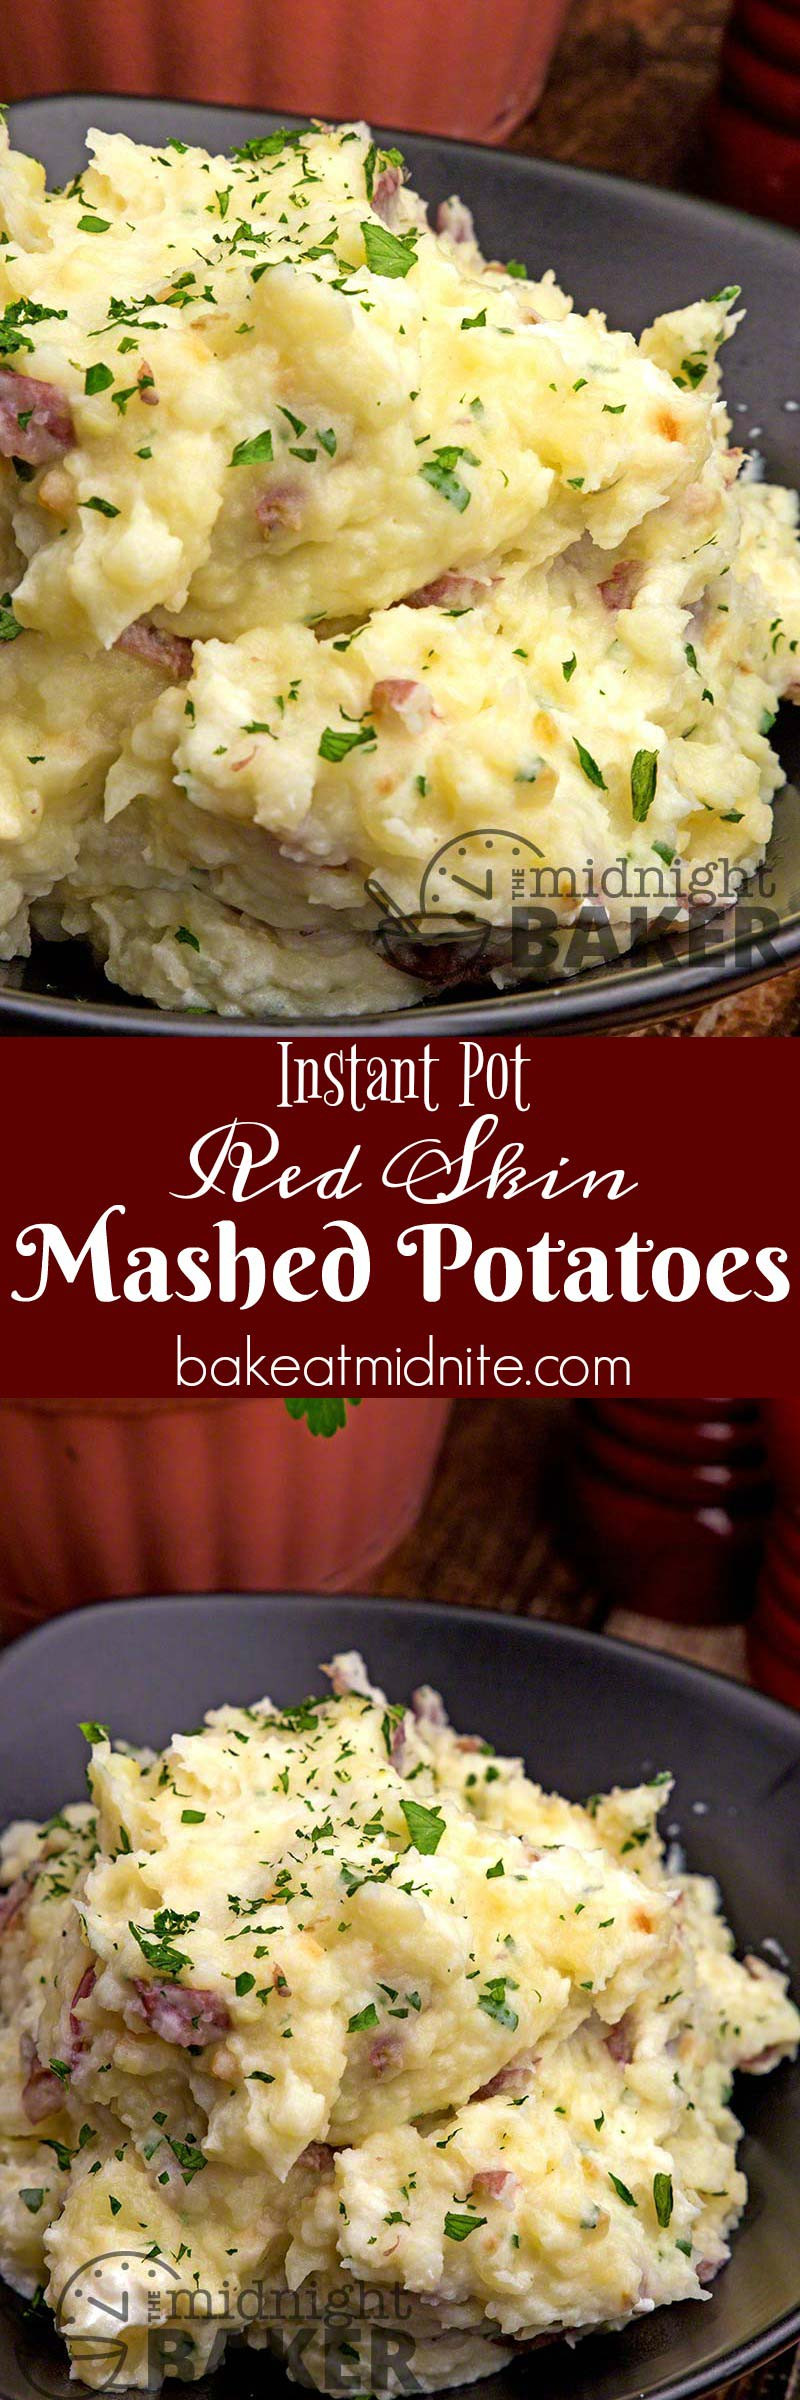 Fiber In Mashed Potatoes
 Instant Pot Red Skinned Mashed Potatoes The Midnight Baker